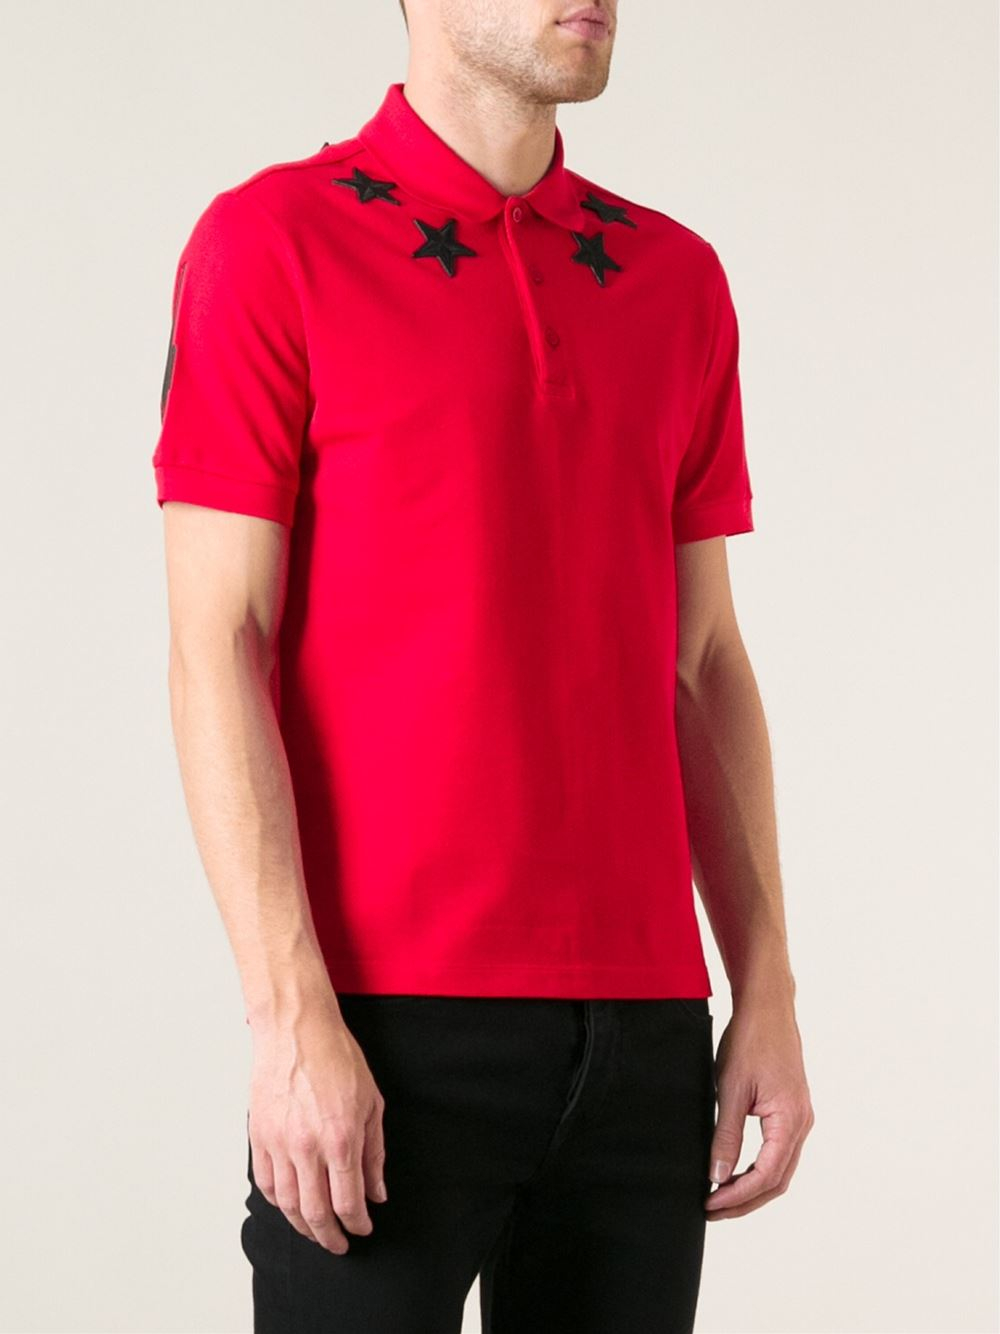 red givenchy polo